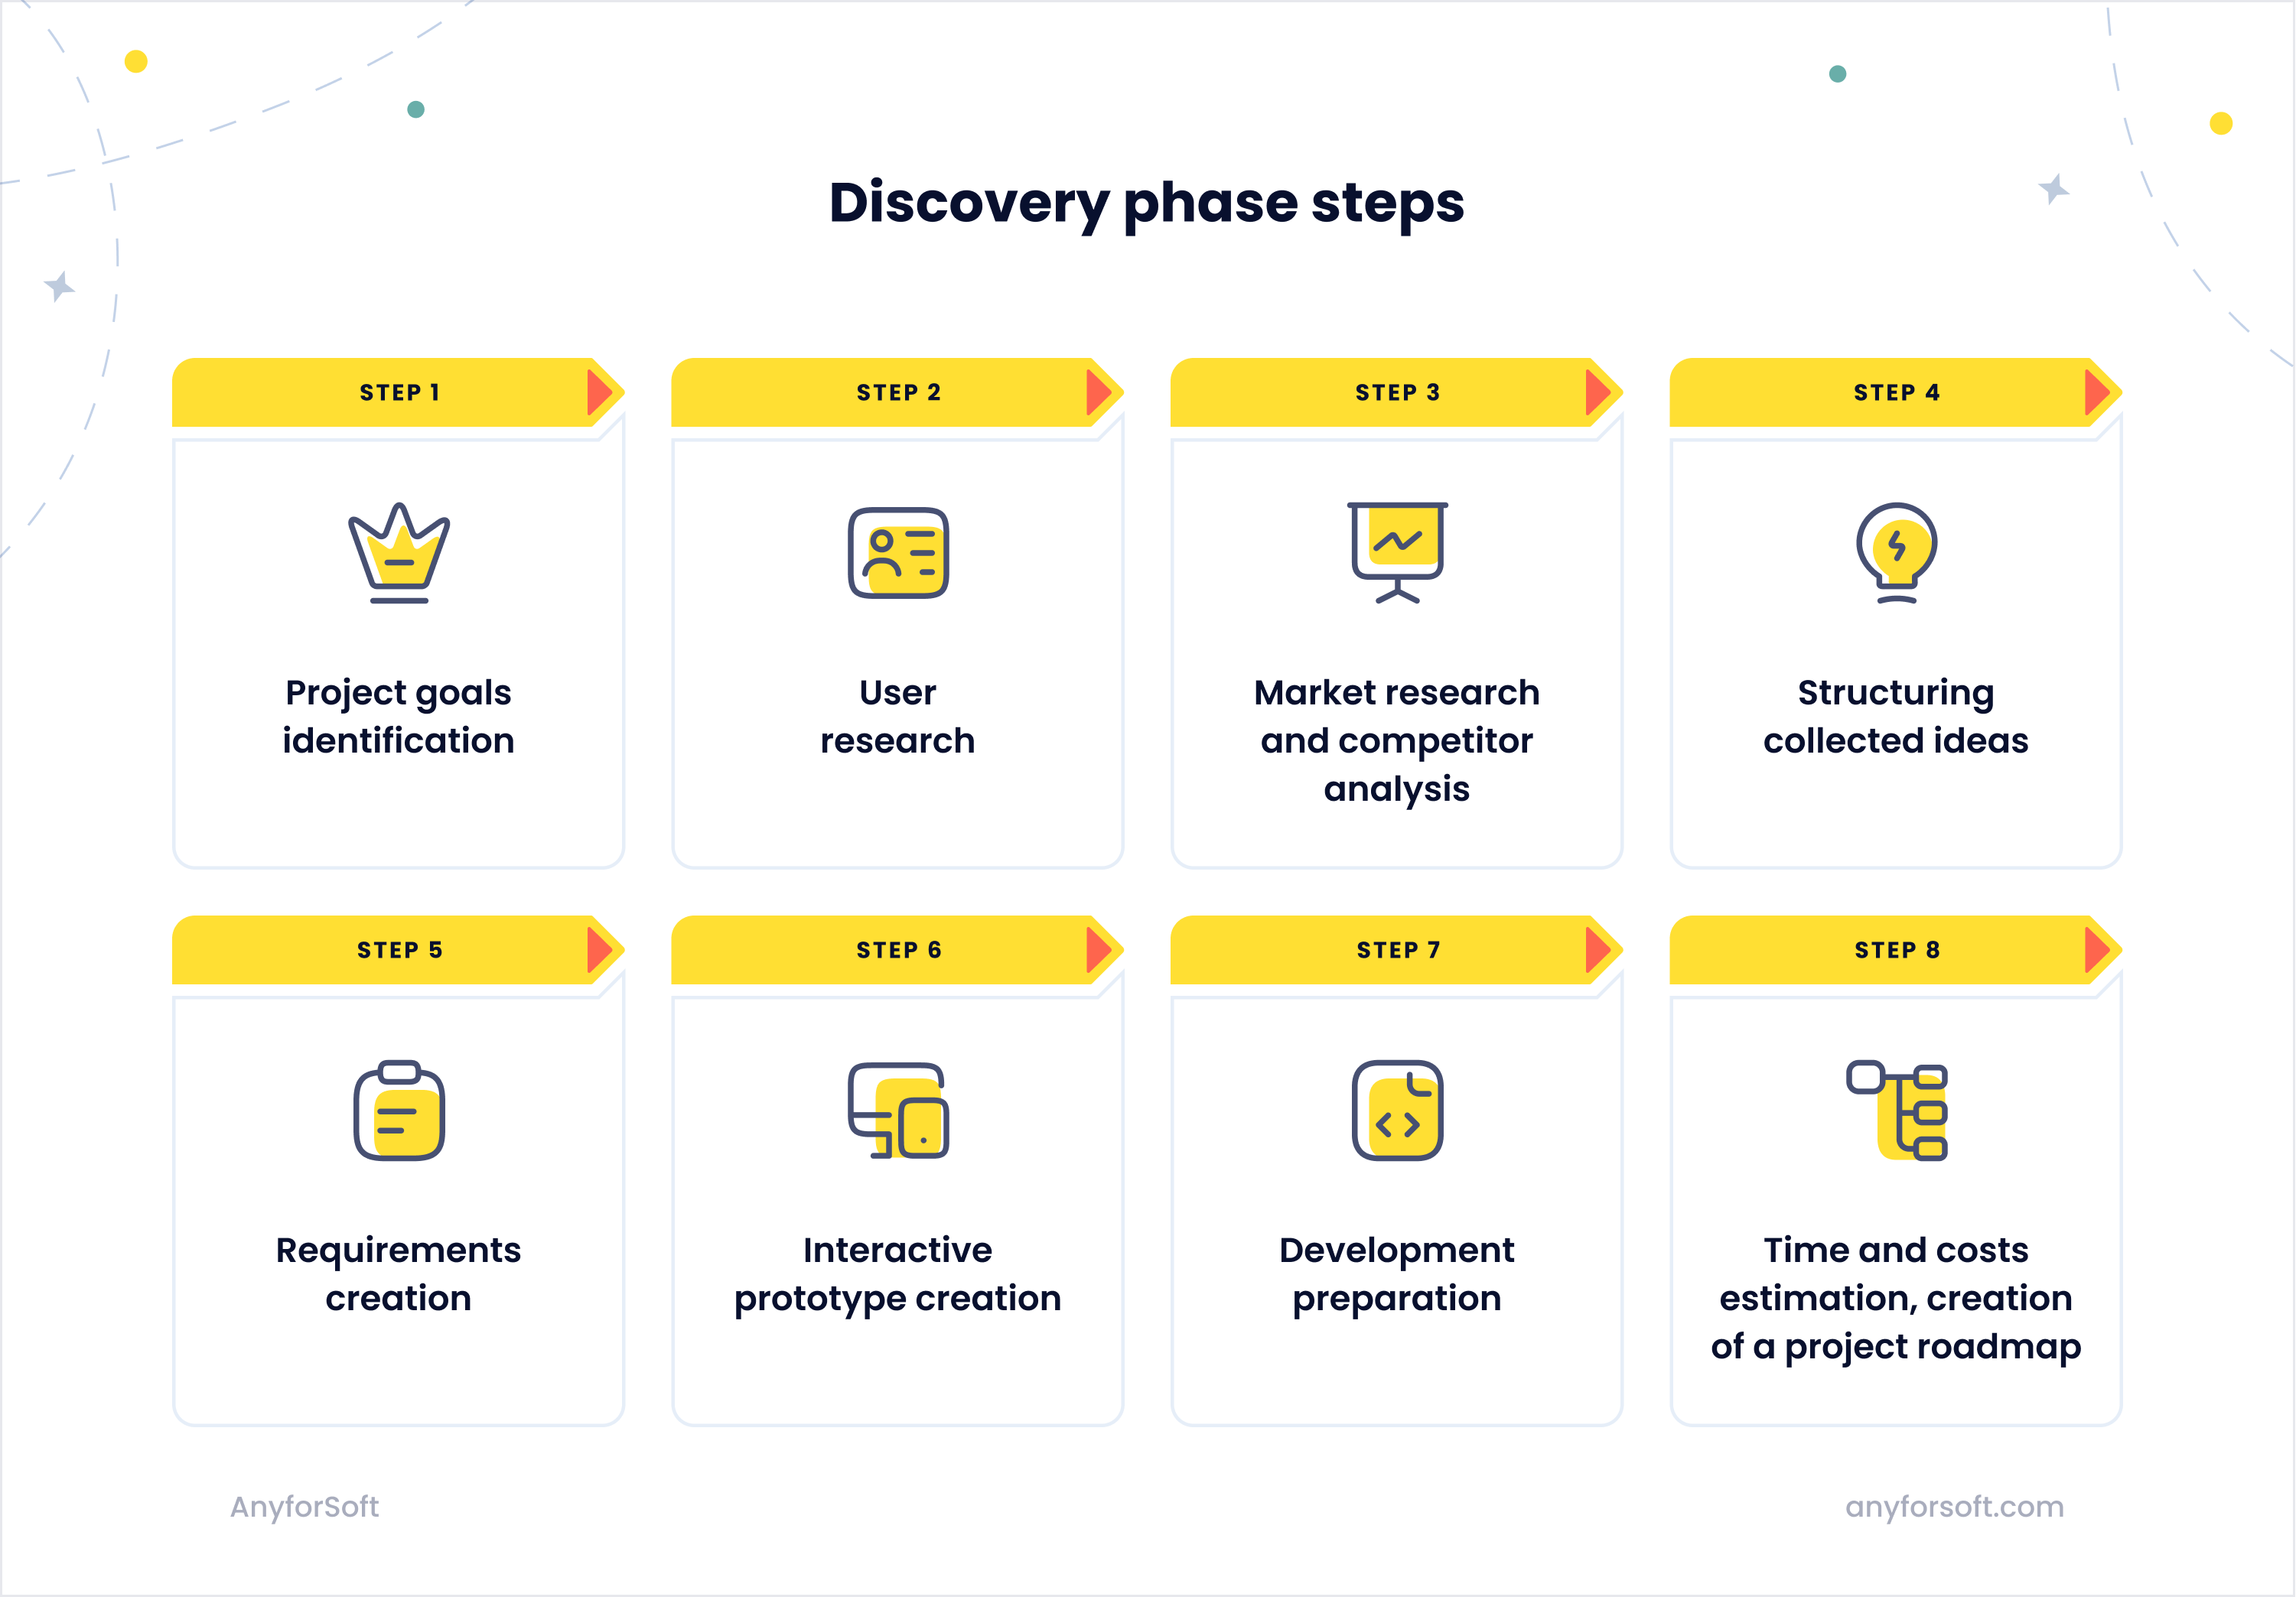 Discovery Phase steps